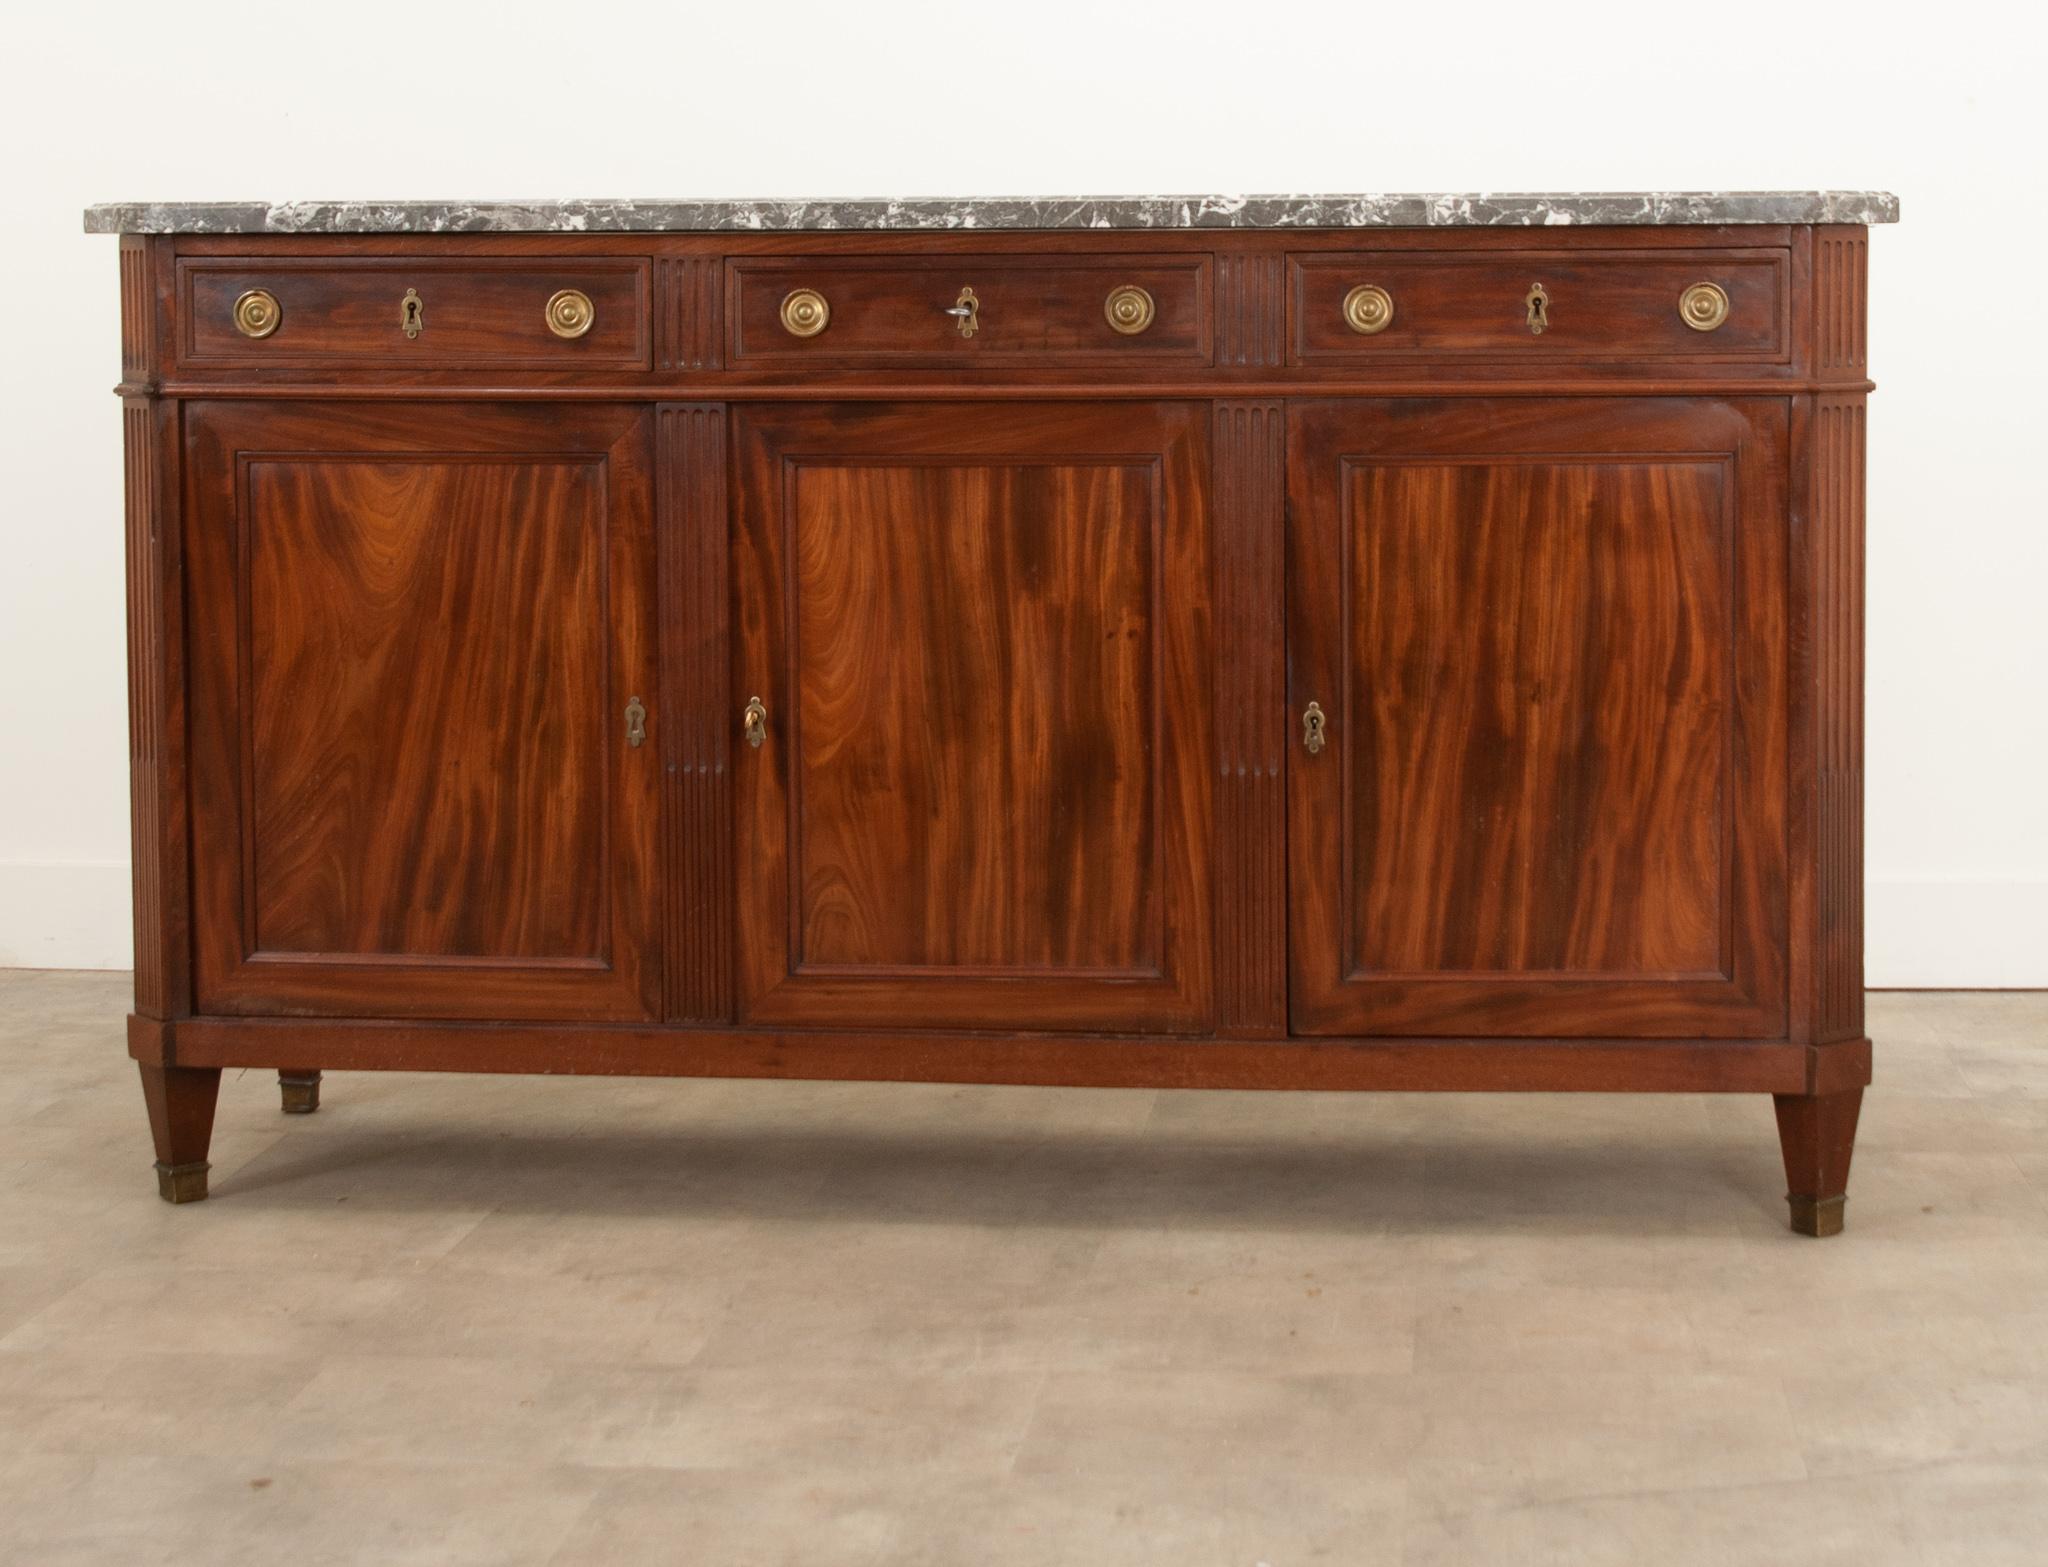 Fabulous fluted detailing and flame mahogany make this 19th century transitional French mahogany enfilade truly stunning. This solid mahogany case piece incorporates elements of both Louis XVI and Directoire styles. A shaped charcoal and gray marble